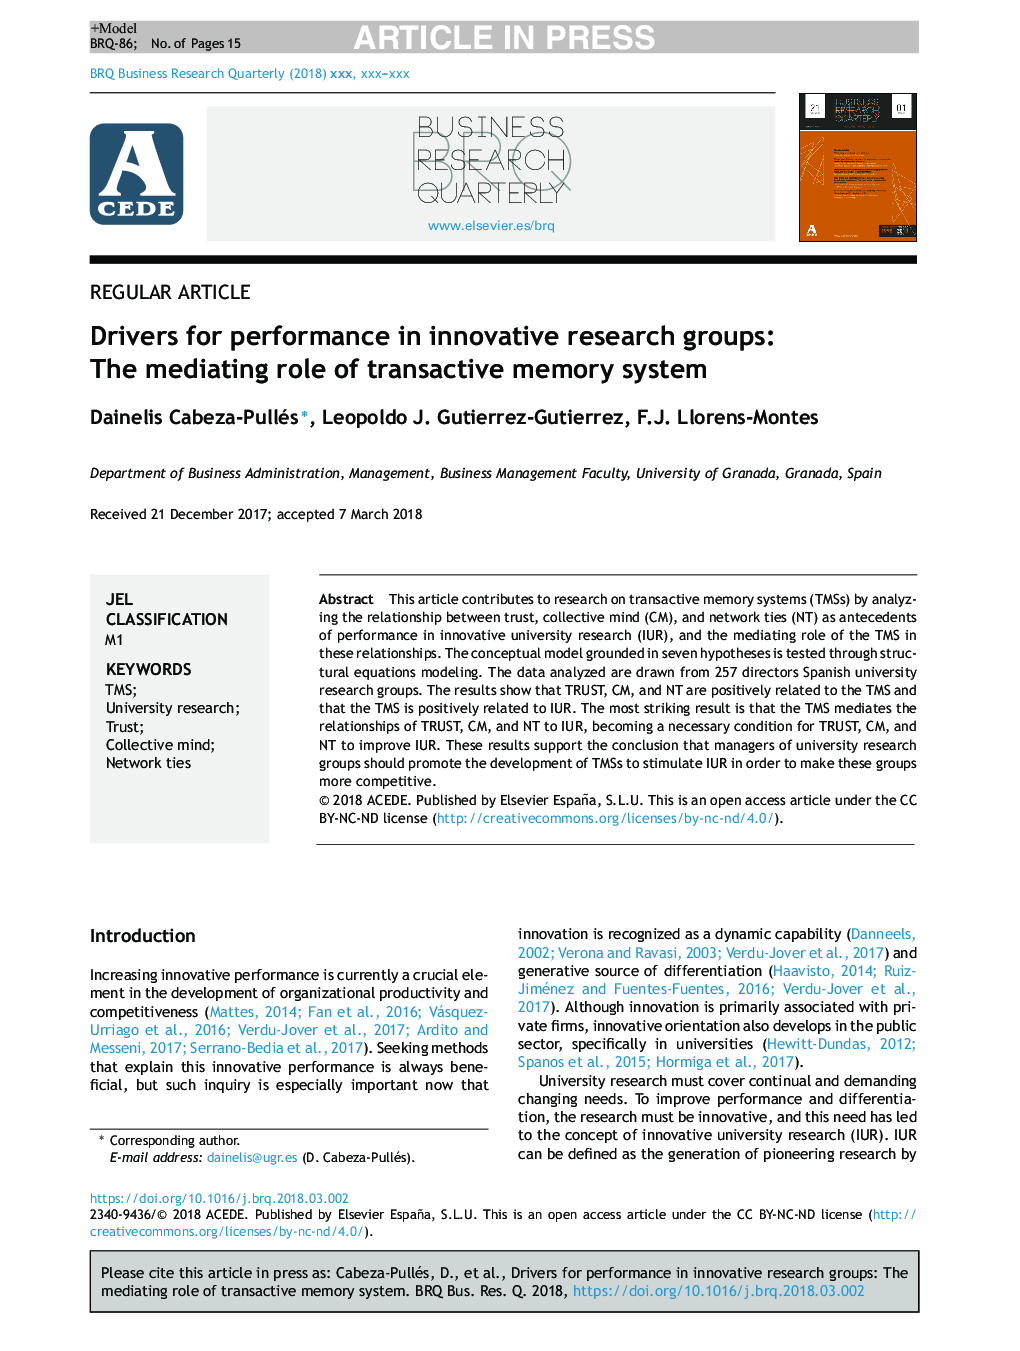 Drivers for performance in innovative research groups: The mediating role of transactive memory system